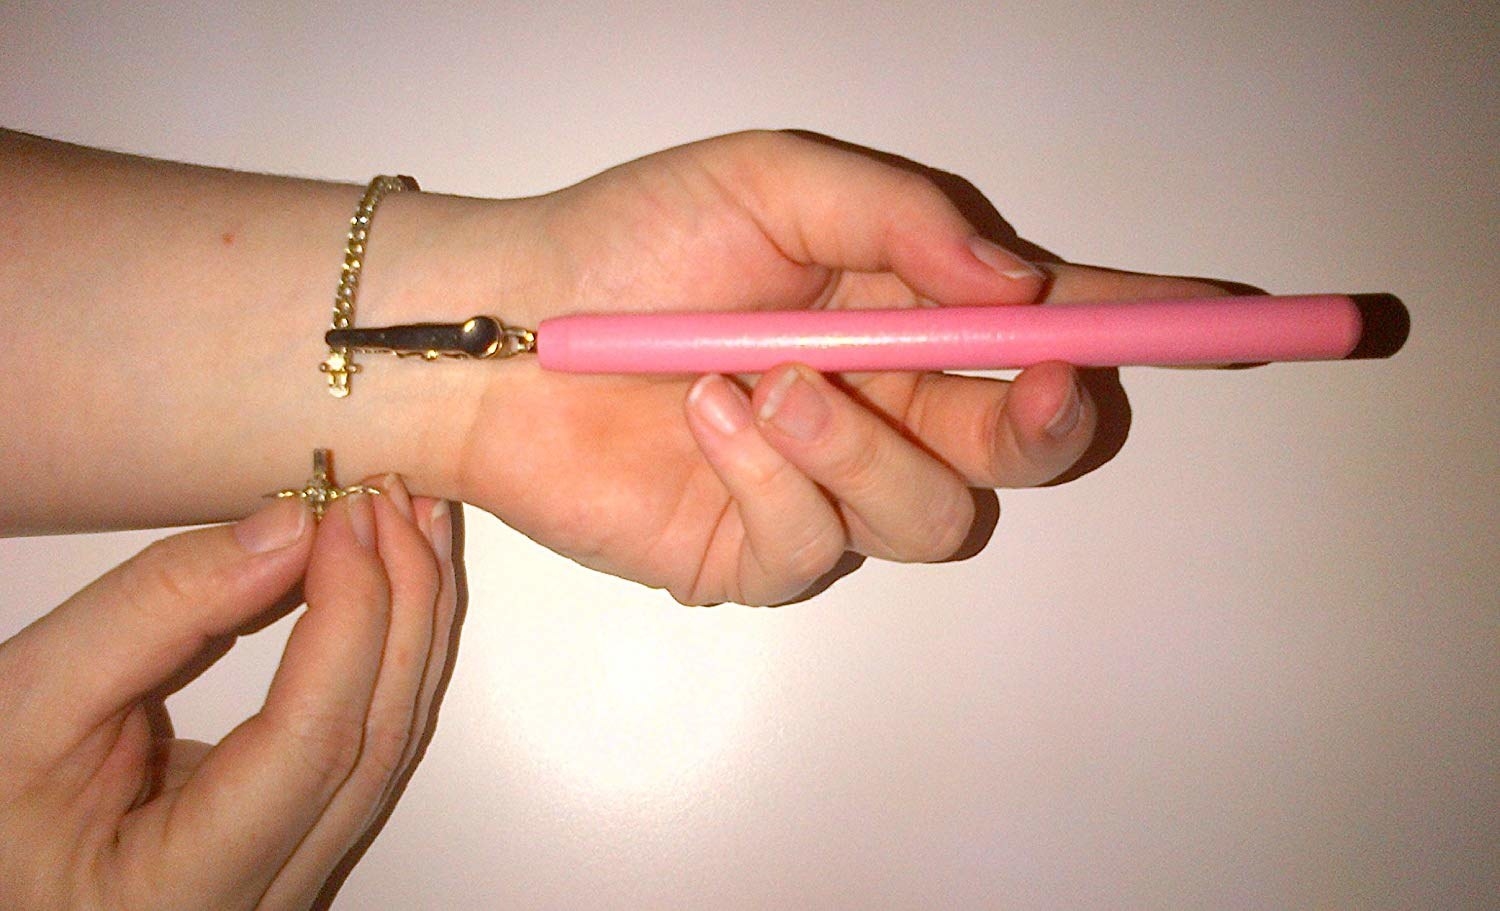 A person using the product in pink